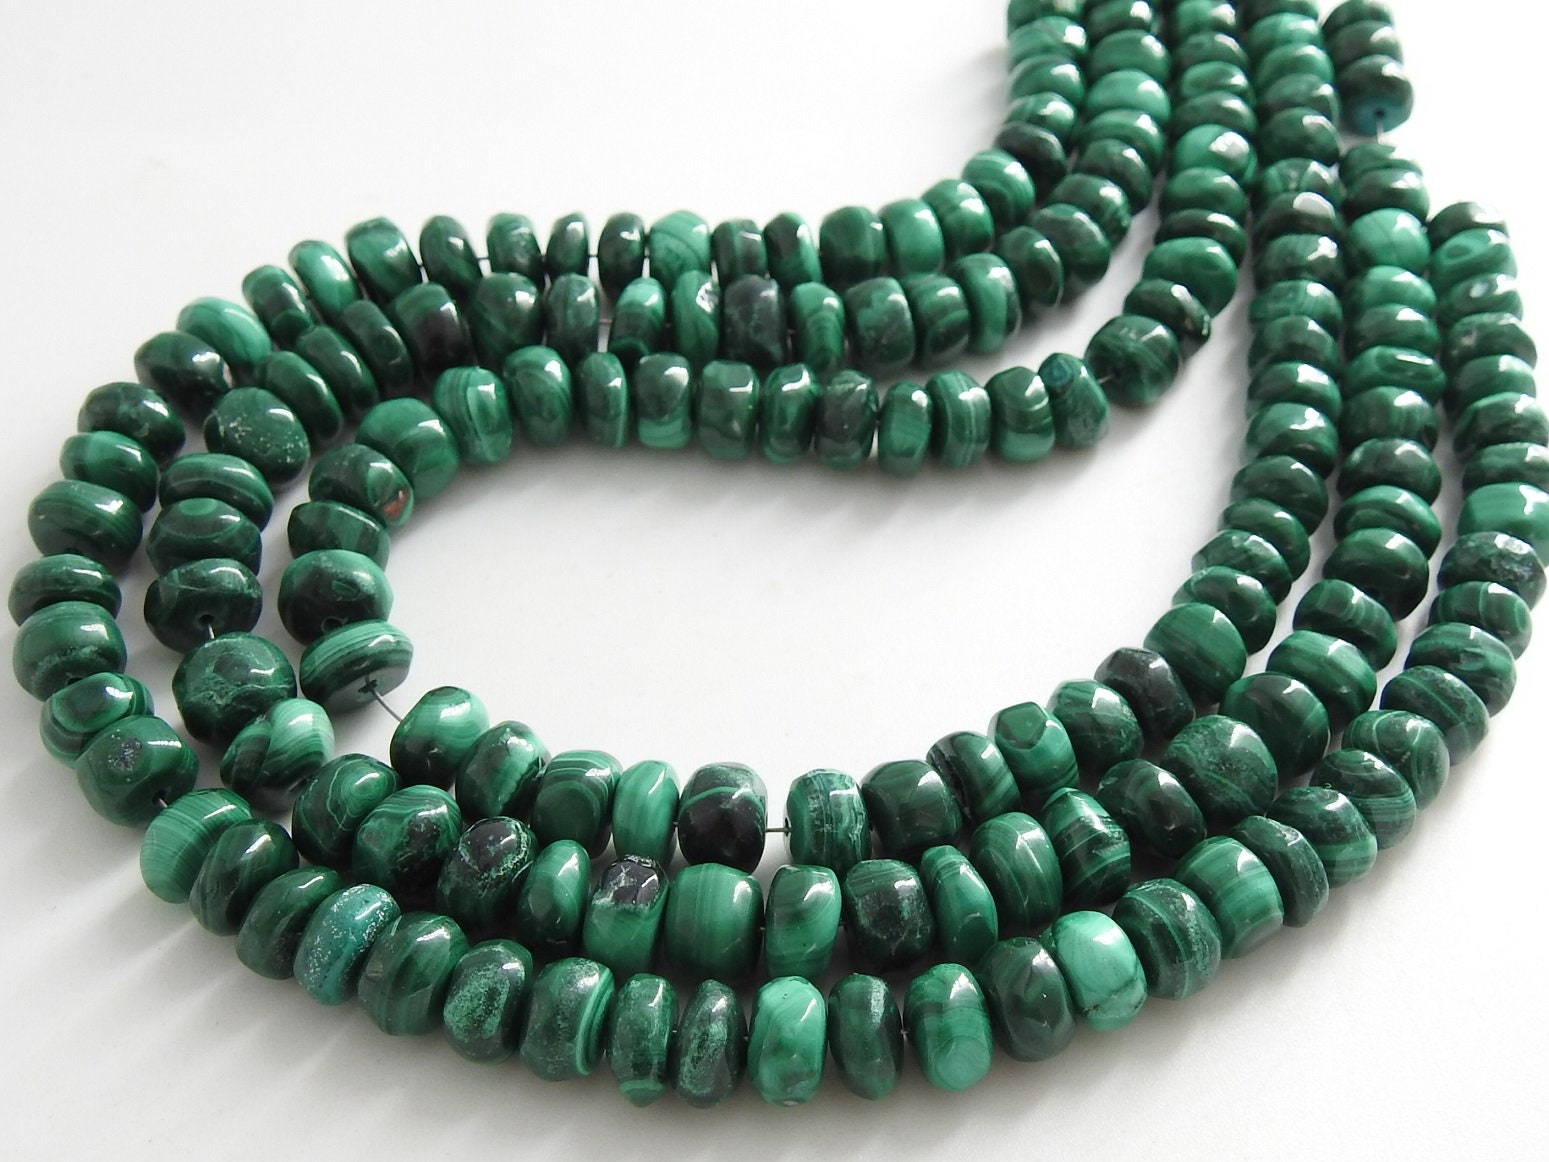 Malachite Roundel Bead,Smooth,Loose Stone,Handmade,For Making Jewelry,Necklace,Wholesaler,Supplies,10Inch Strand,100%Natural PME(B13) | Save 33% - Rajasthan Living 12